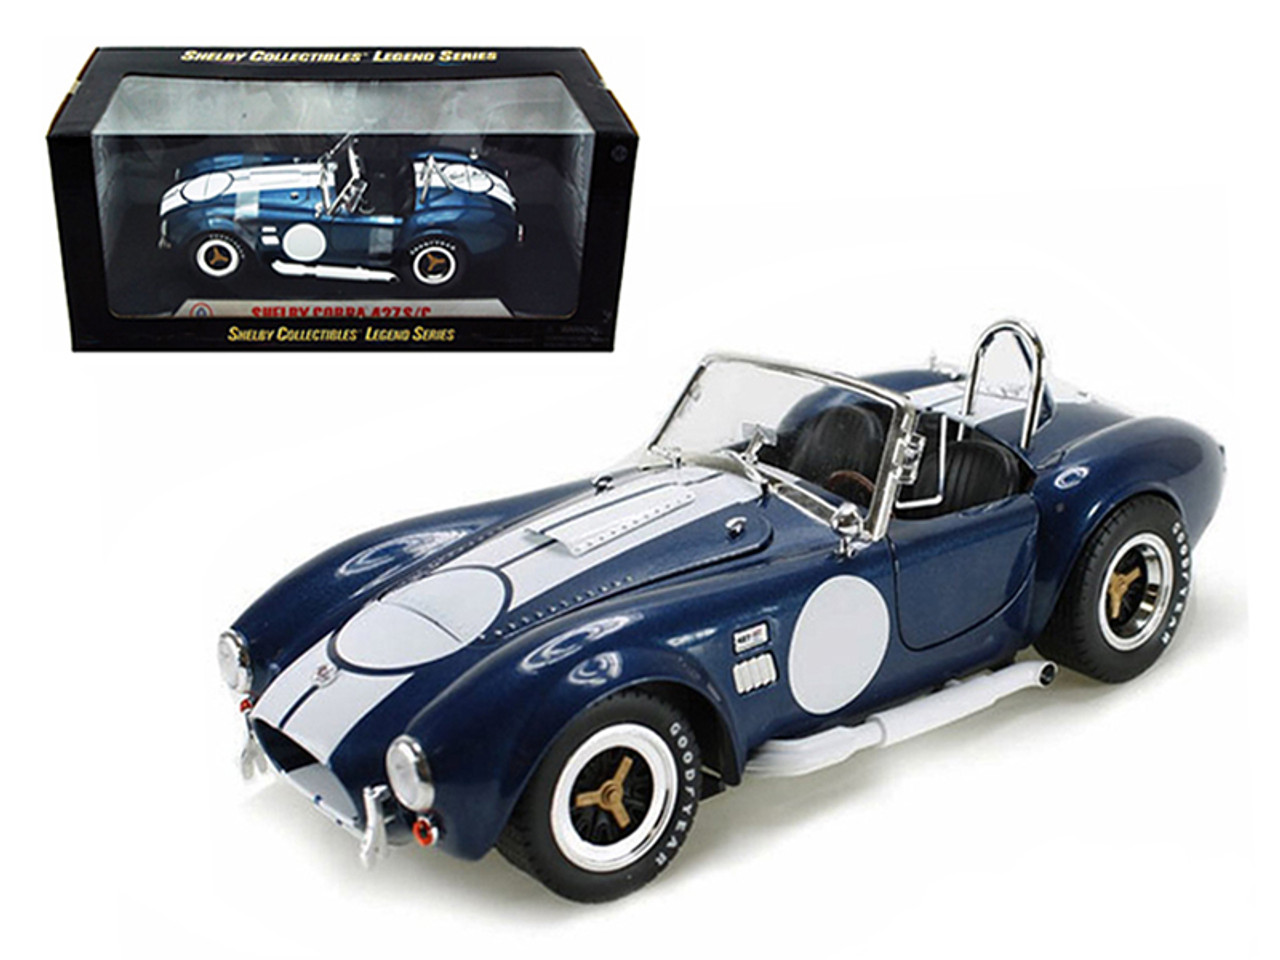 1/18 Shelby Collectibles 1965 Shelby Cobra 427 S/C (Blue With Printed Carroll Shelby Signature) Diecast Car Model